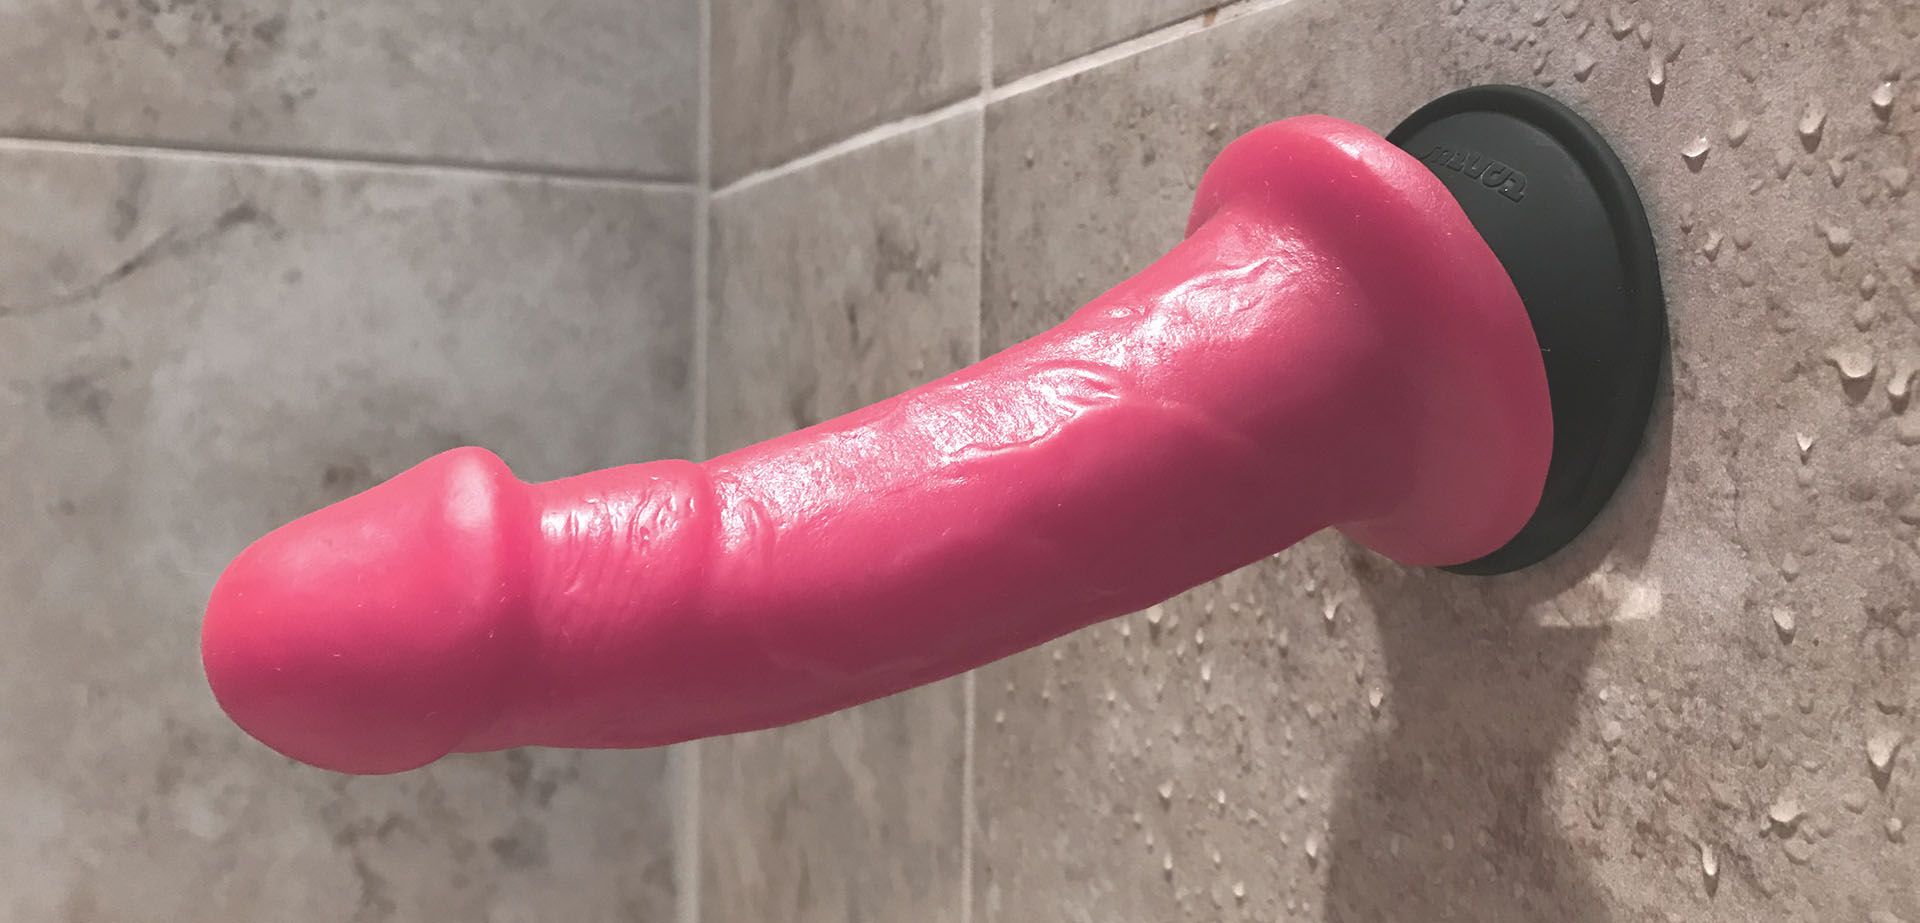 wall mounted dildo shower pic from sex video